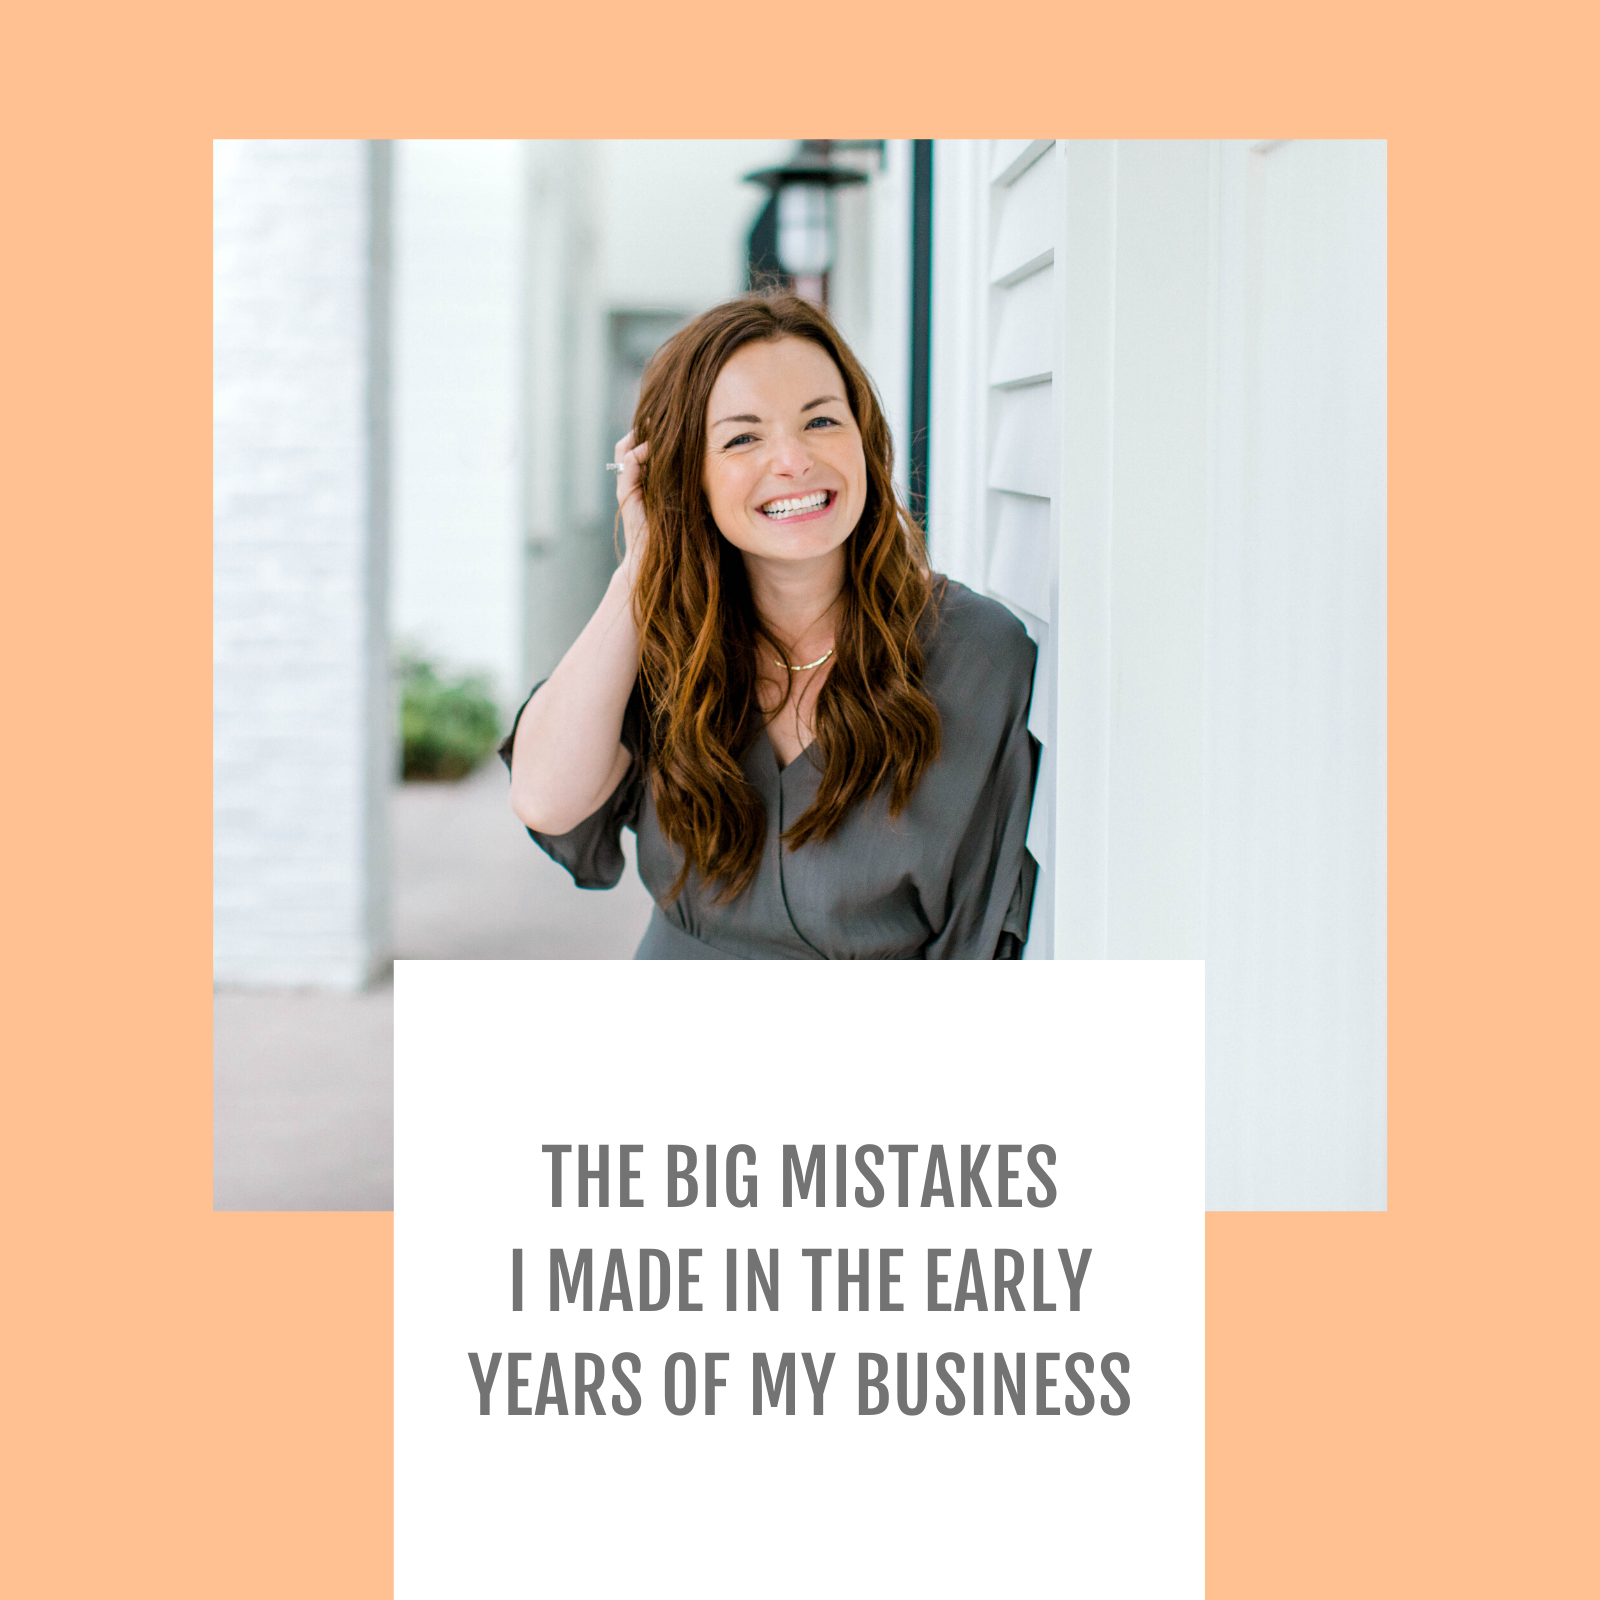 Episode #020: The big mistakes I made in the early years of my business